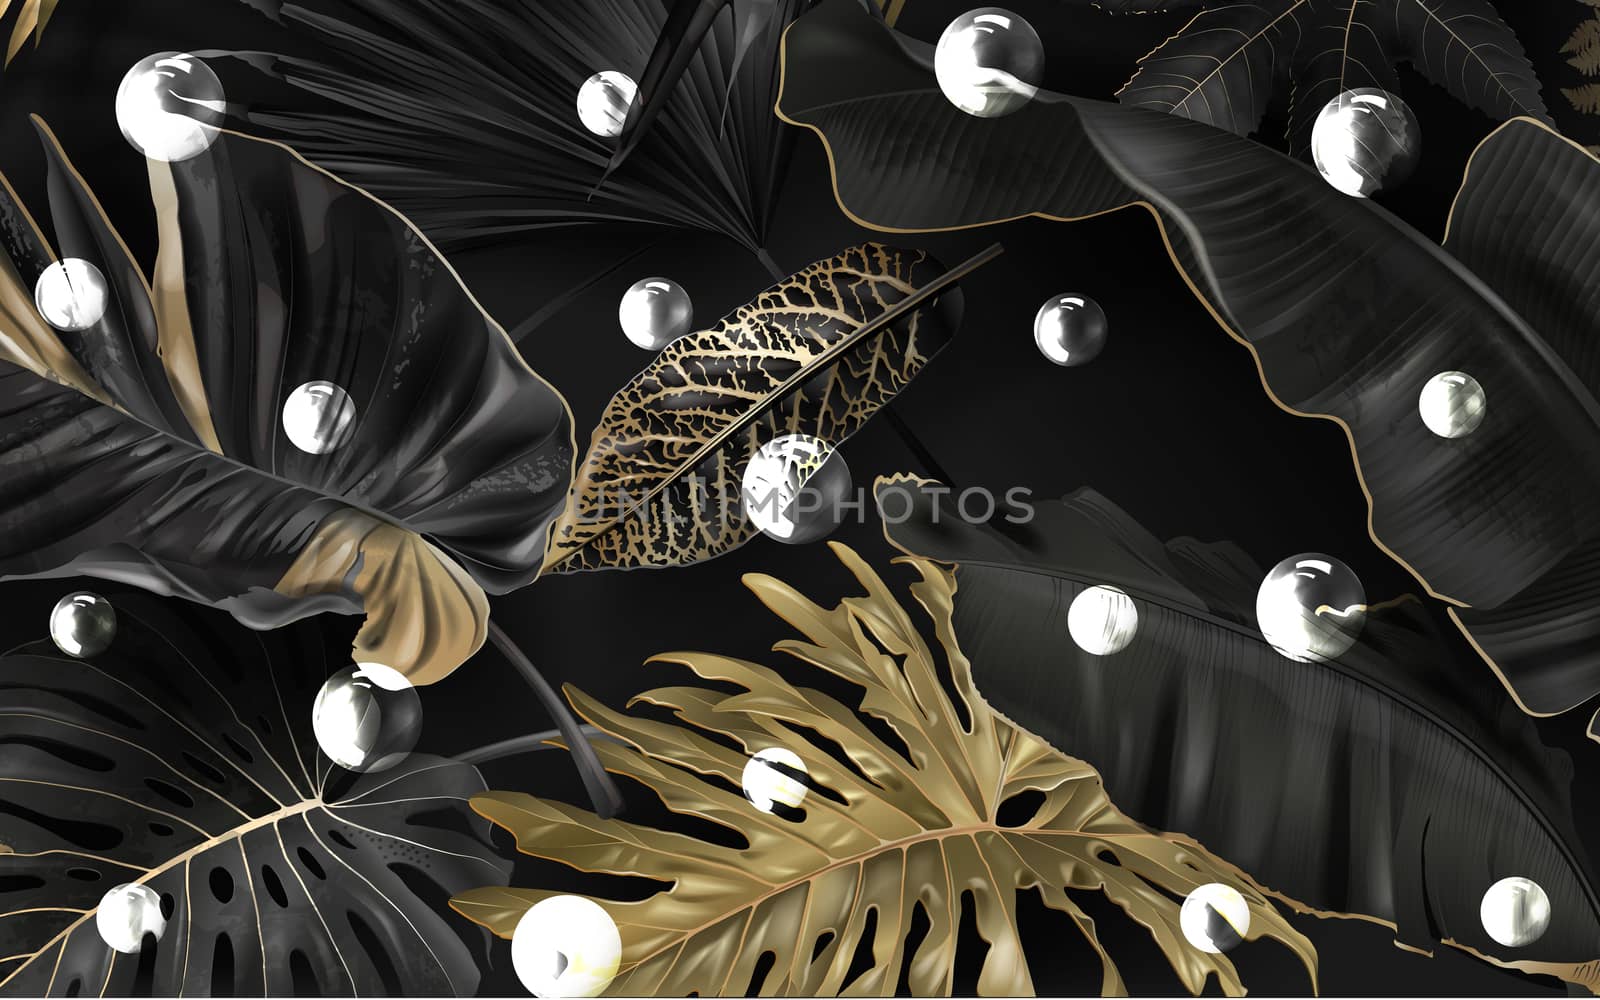 black and gold tropical leaves on dark marble background  Luxury exotic botanical